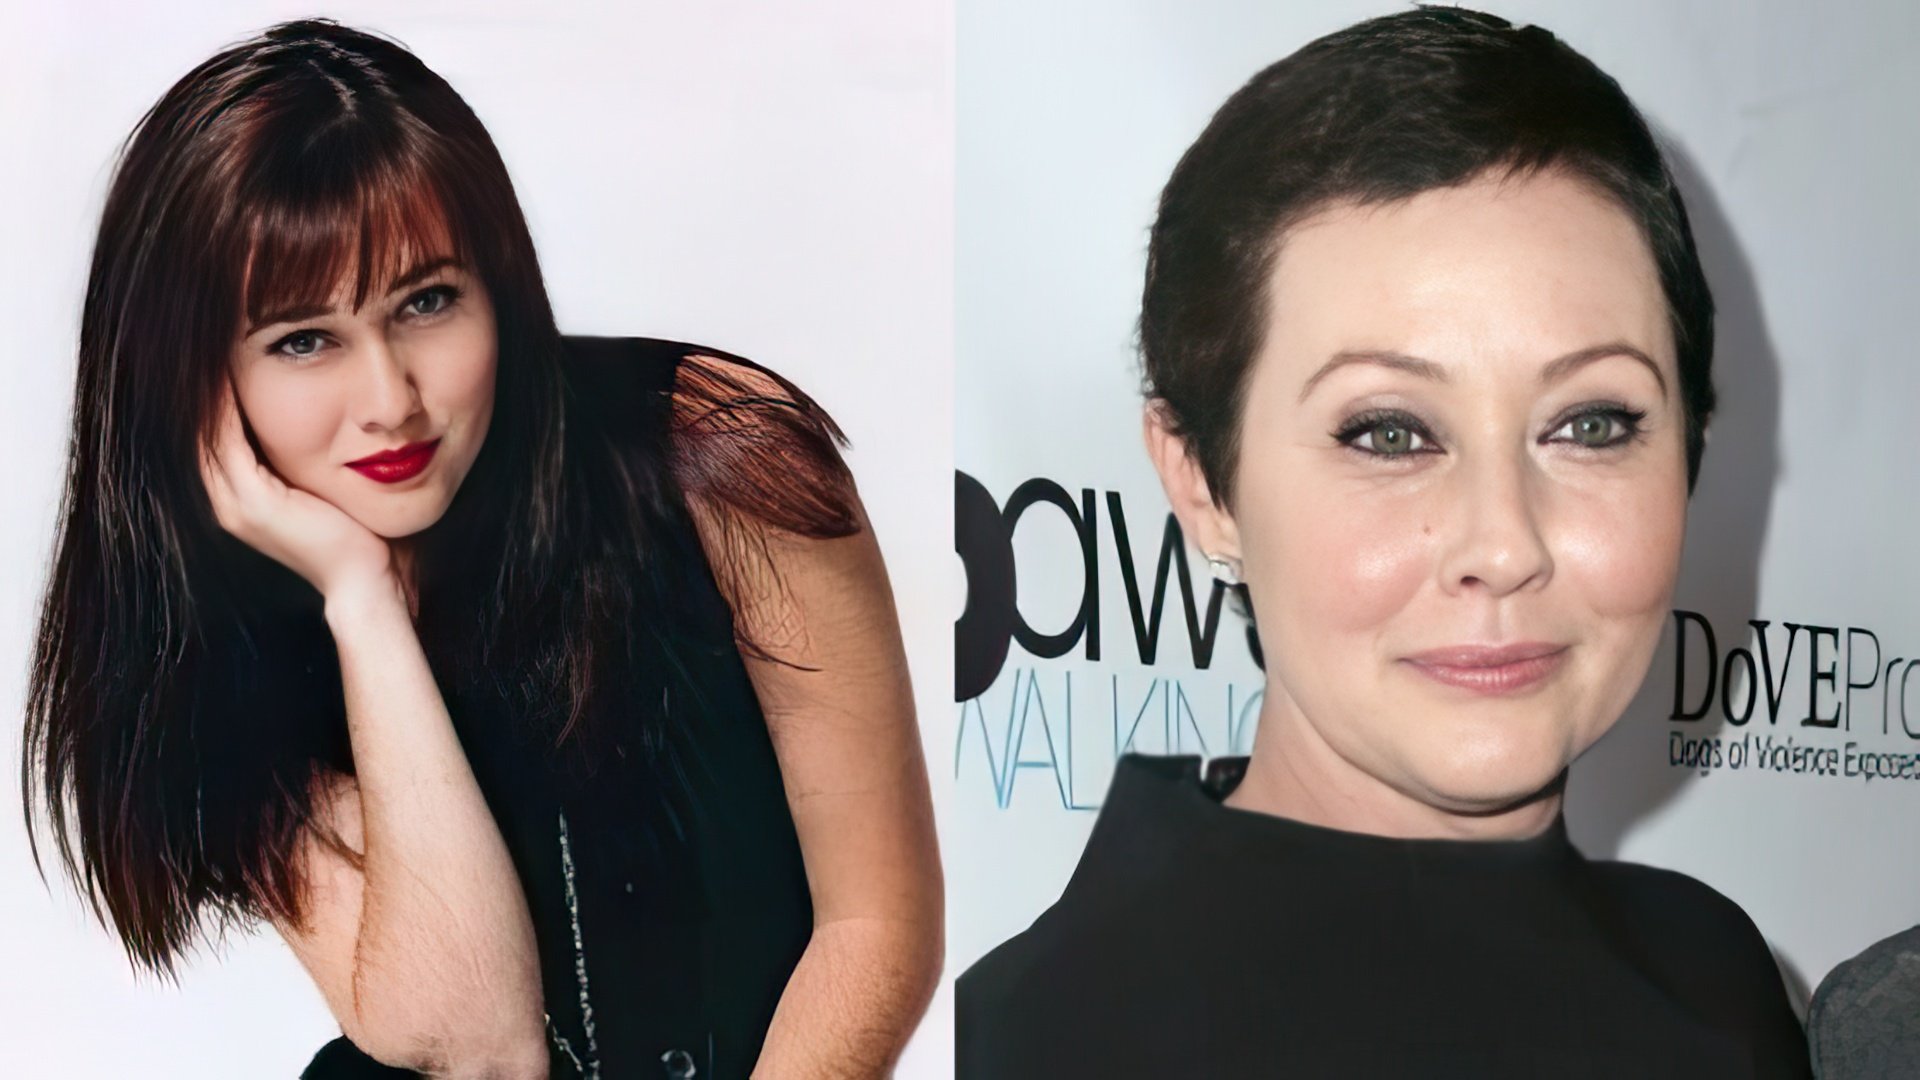 Shannen Doherty in her youth and now